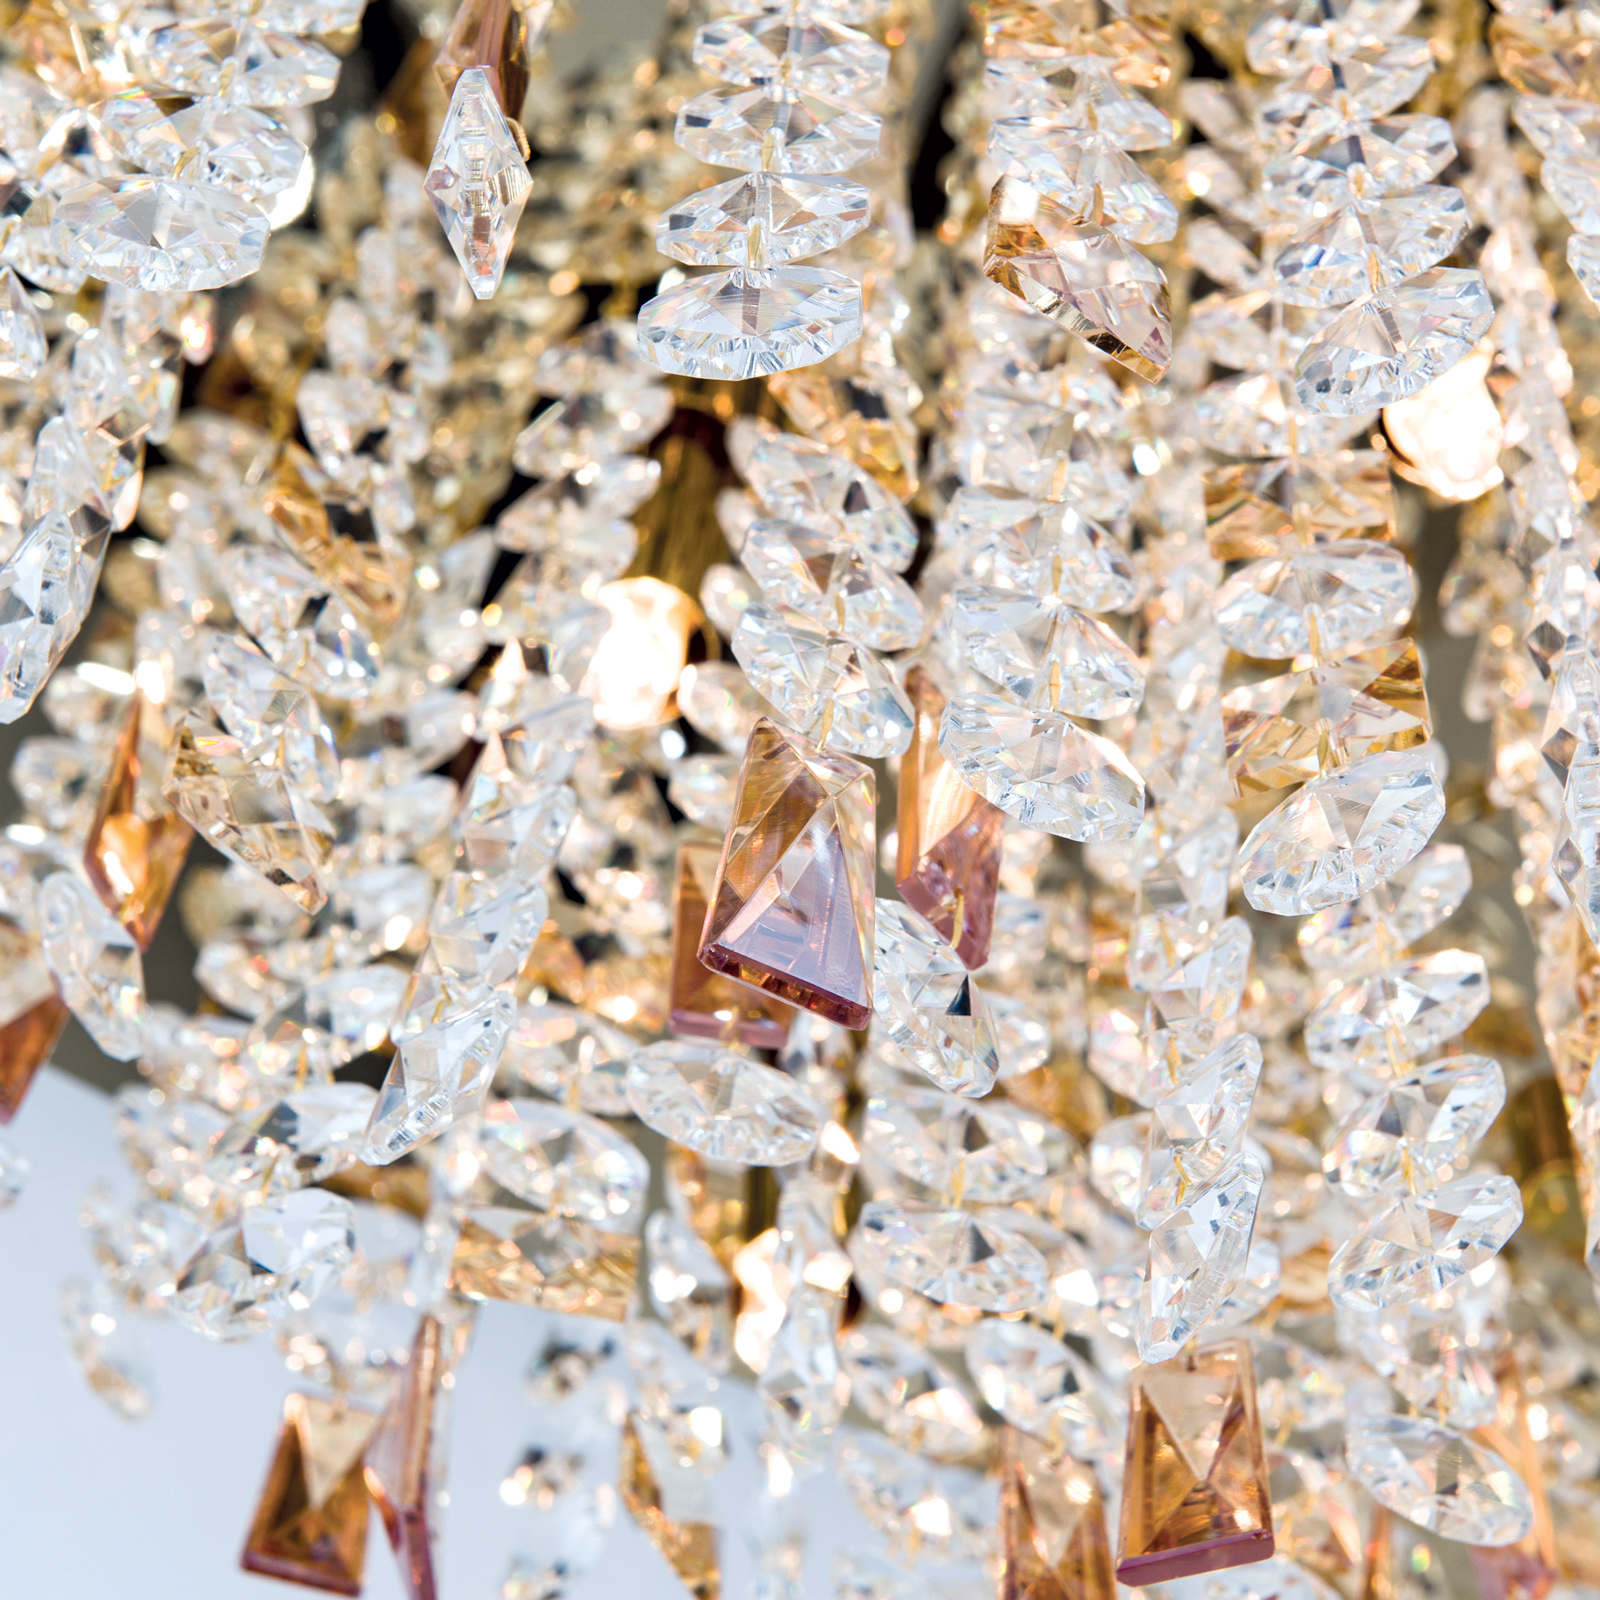 Crystalriver ceiling lamp, crystal elements, gold